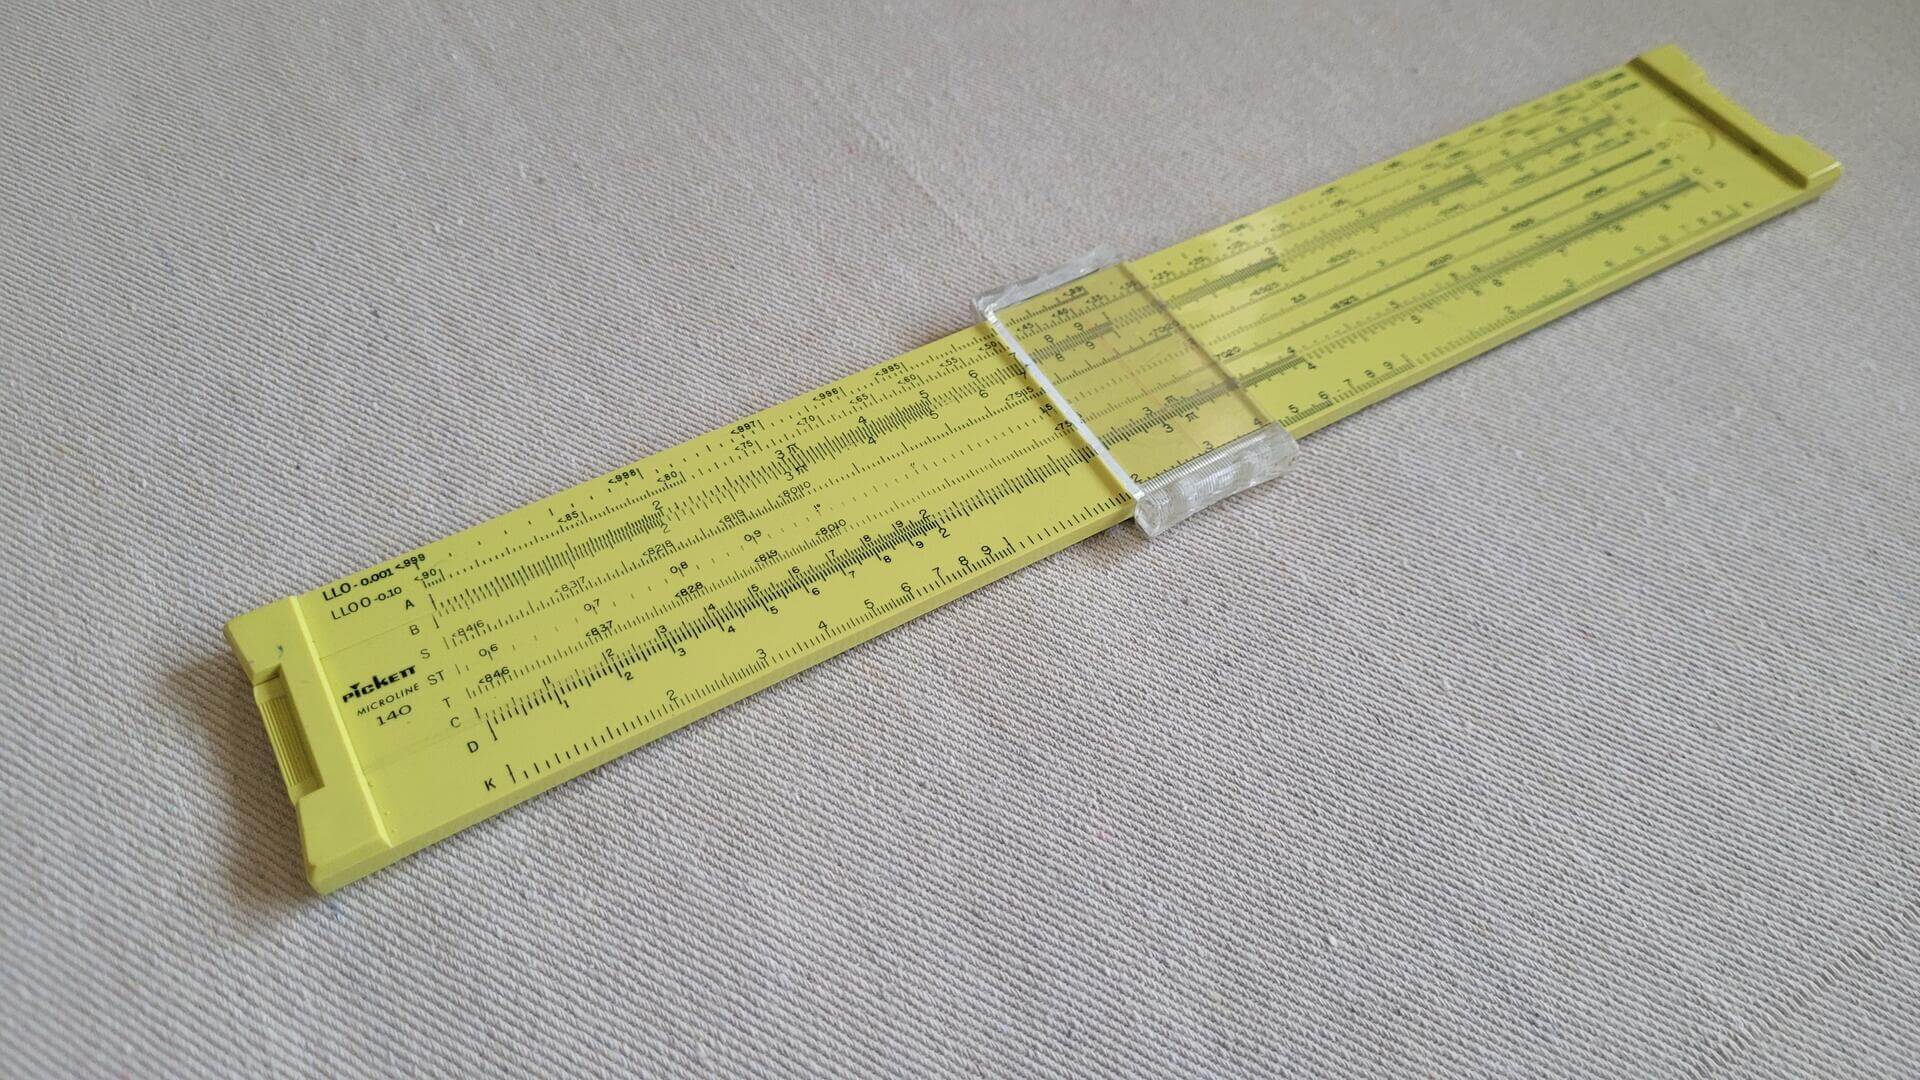 Vintage Picket Industries Microline model 140 duplex slide rule with clear indicator manufactured in Santa Barbara, CA. Mid century MCM made in USA collectible school and engineering marking and measuring tool